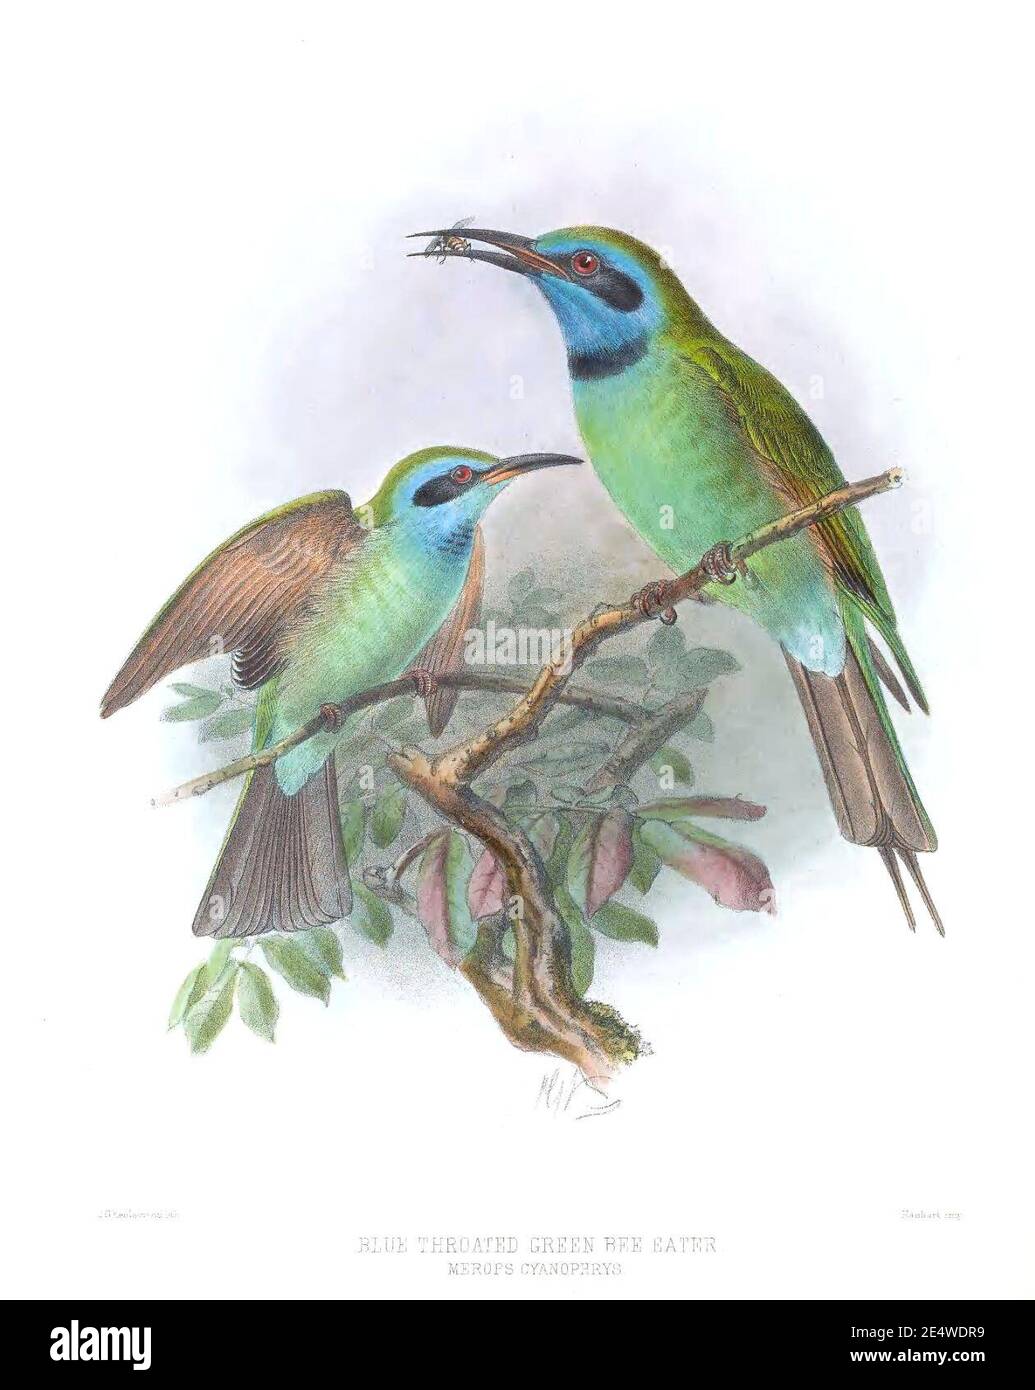 Merops cyanophrys Keulemans. Stock Photo